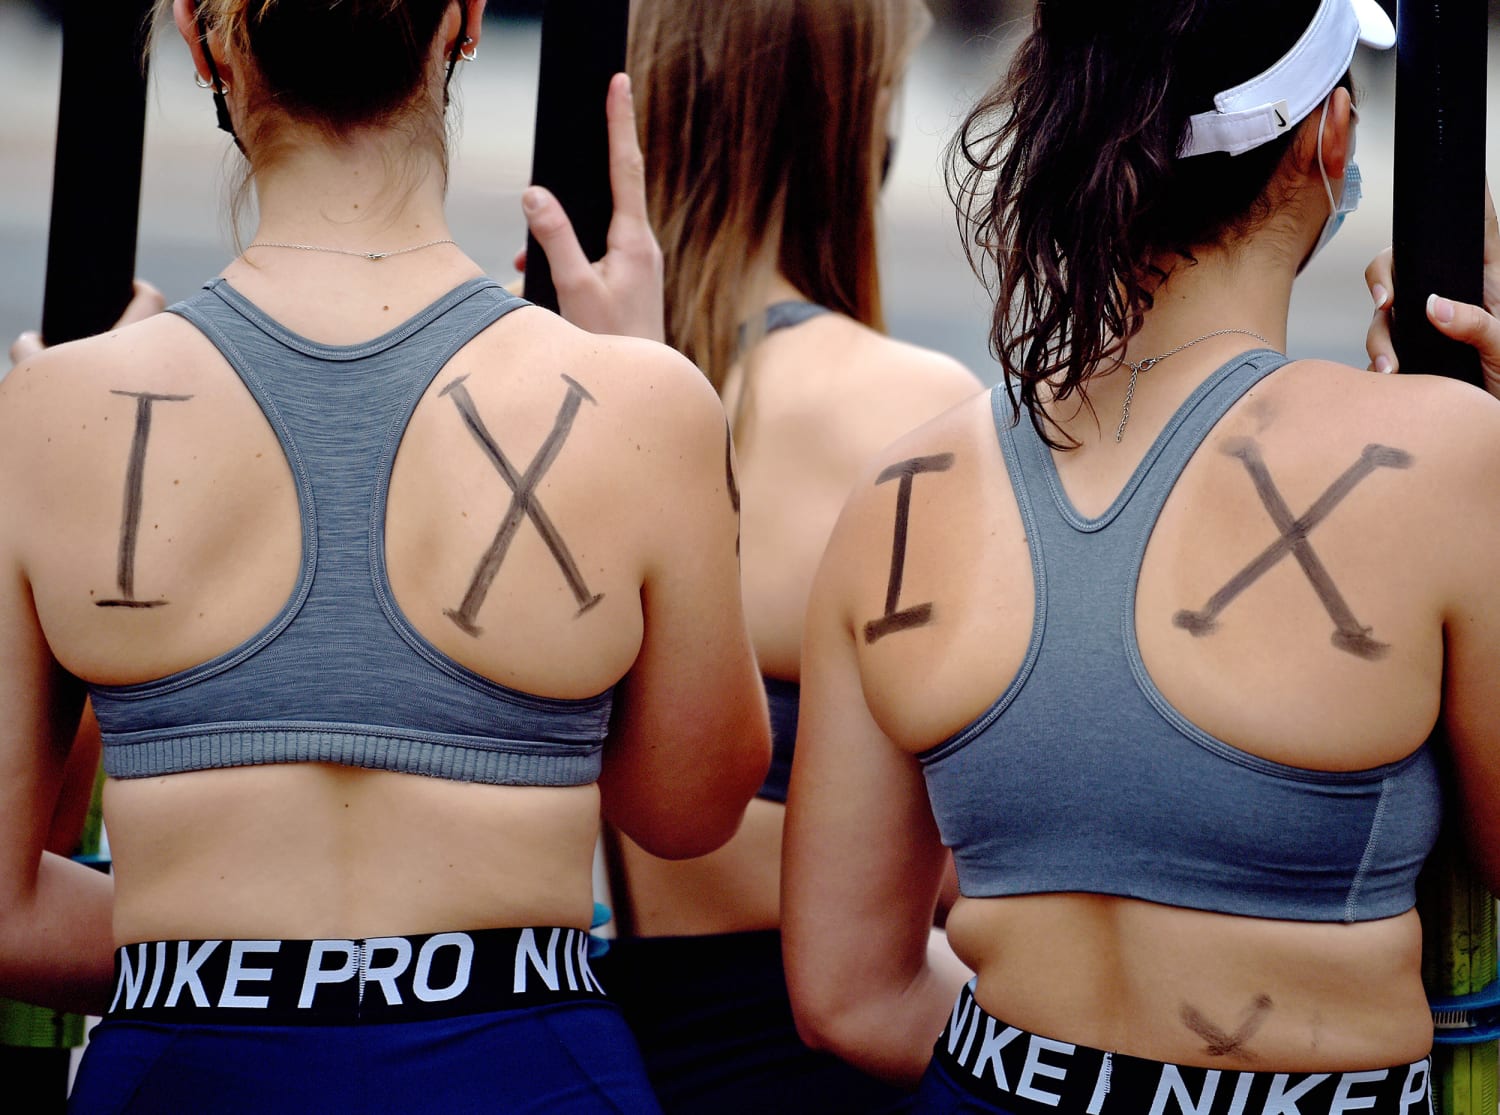 School board to decide on whether sports bras will be allowed for